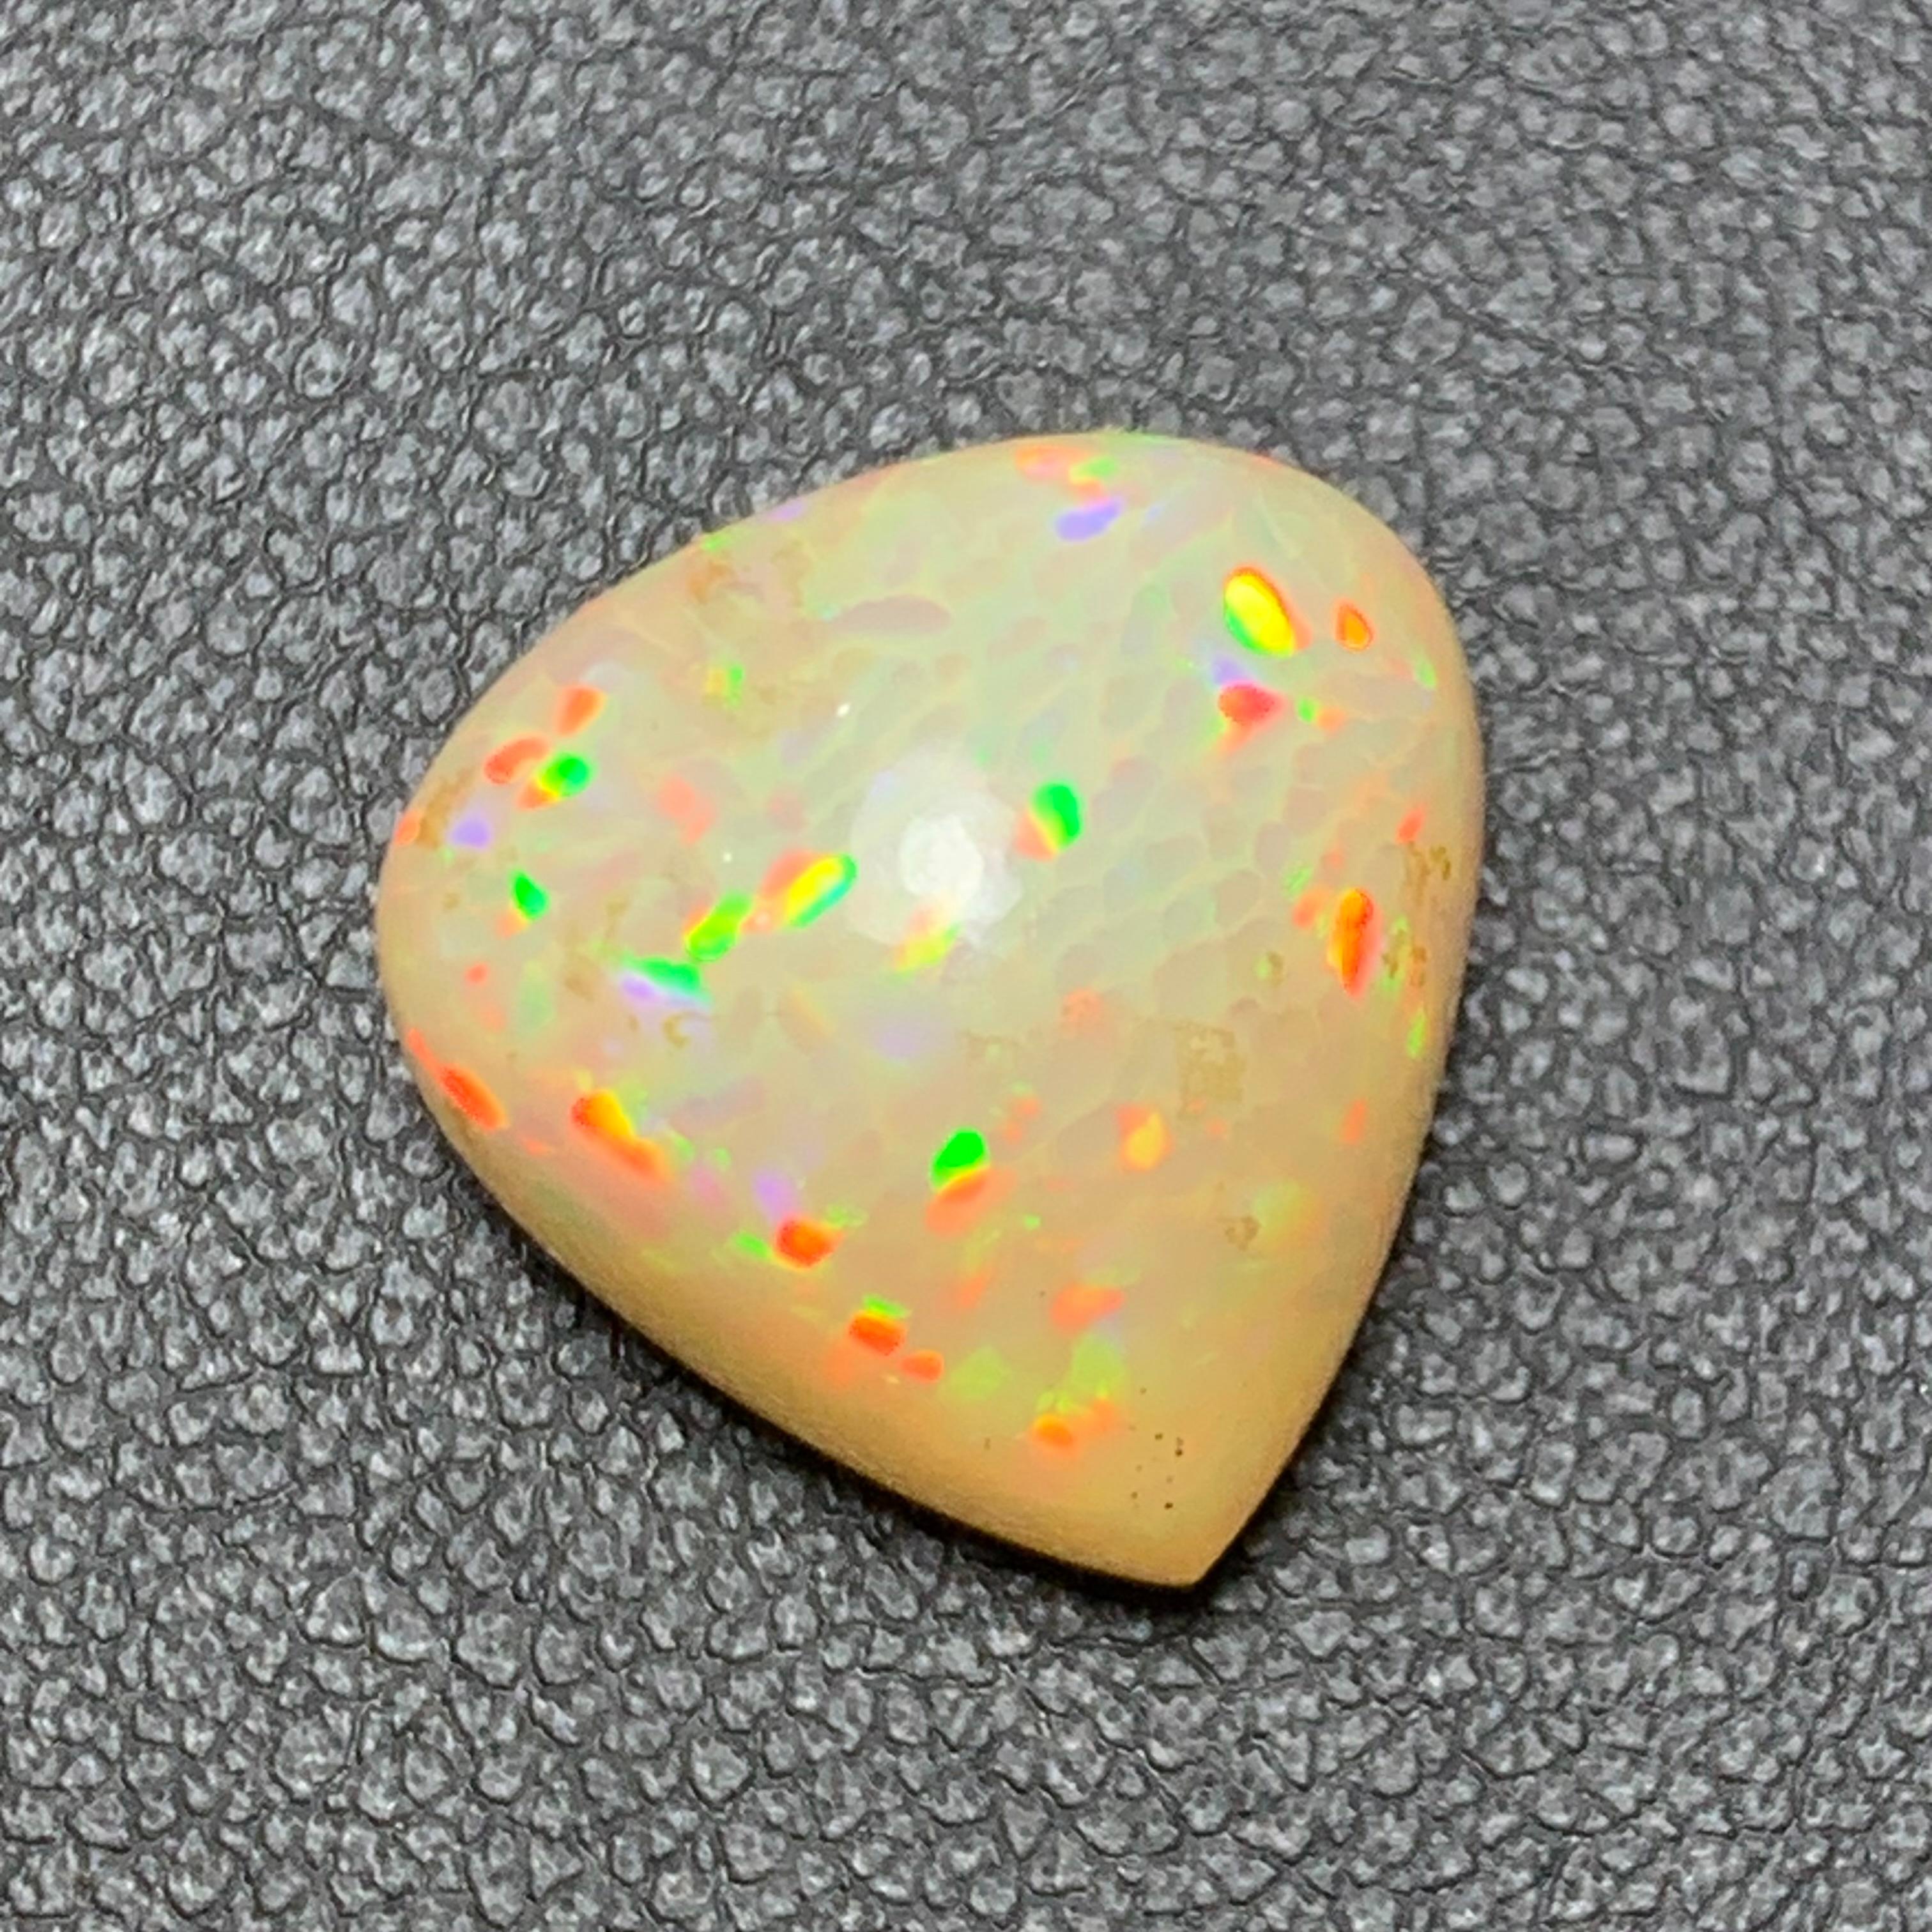 Pear Cut Rare Natural Opal Gemstone Cabochon 10.90 Ct Pear  Shape Full of Fire Color Play